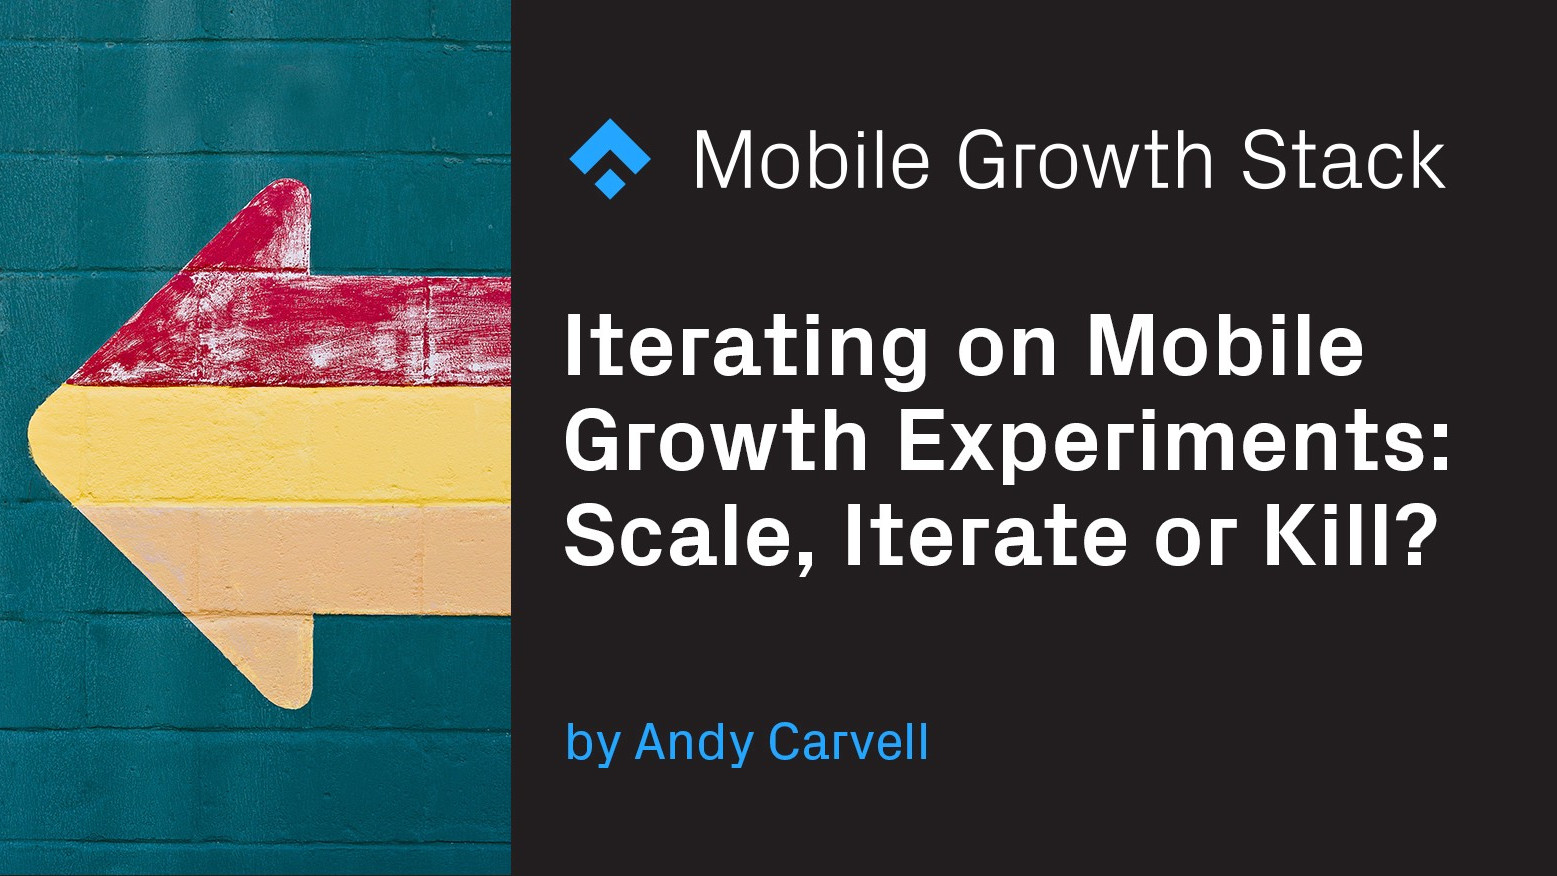 Iterating on Mobile Growth Experiments: Scale, Iterate or Kill?